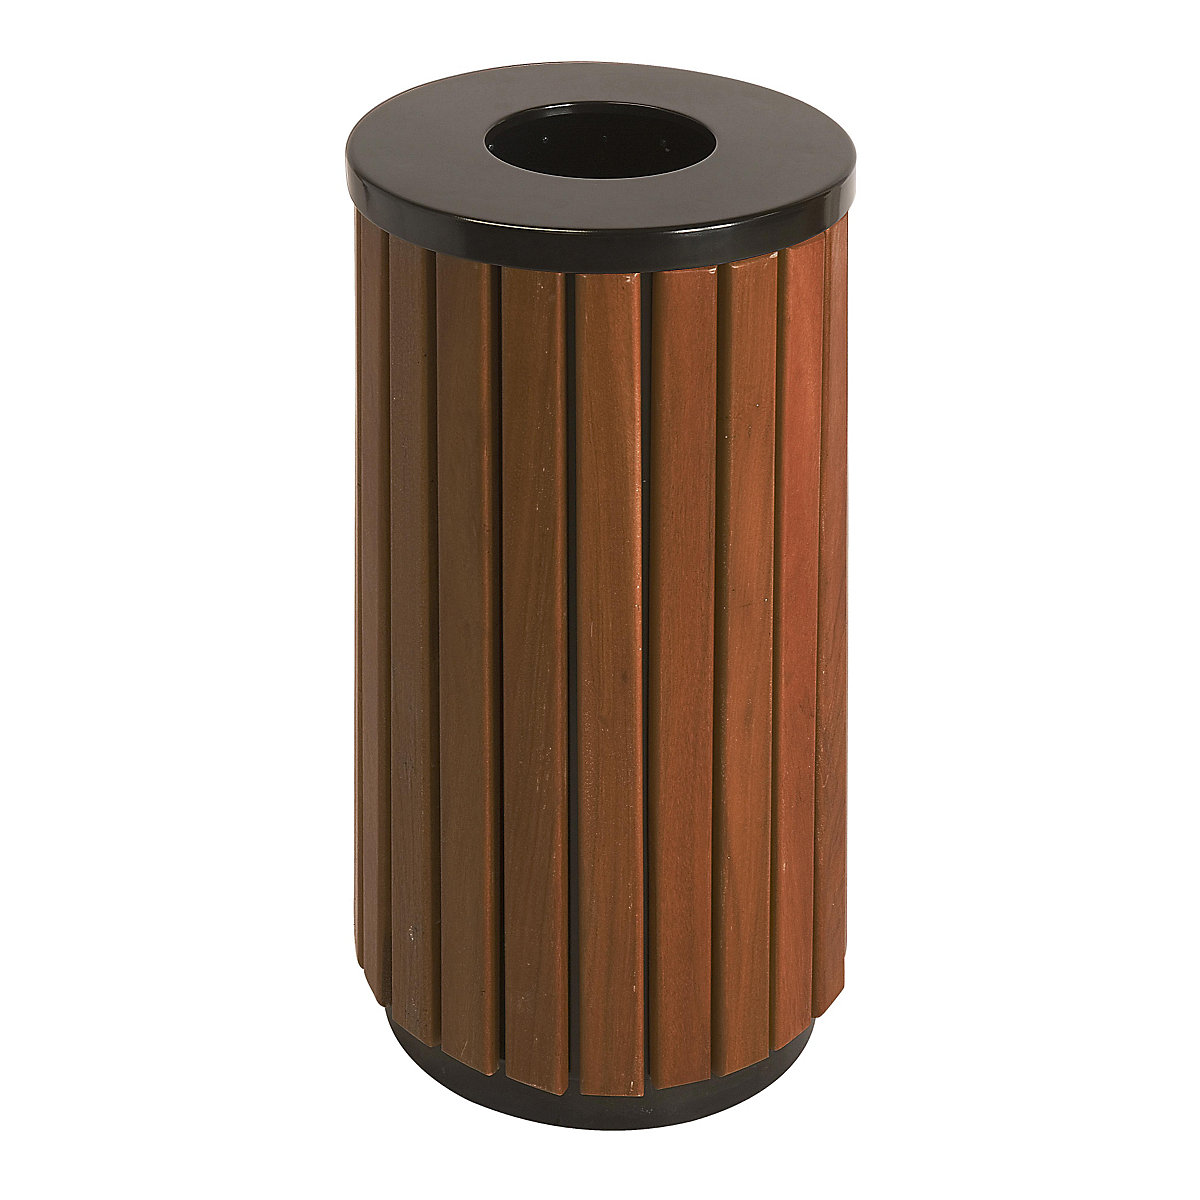 Outdoor waste collector, wood finish